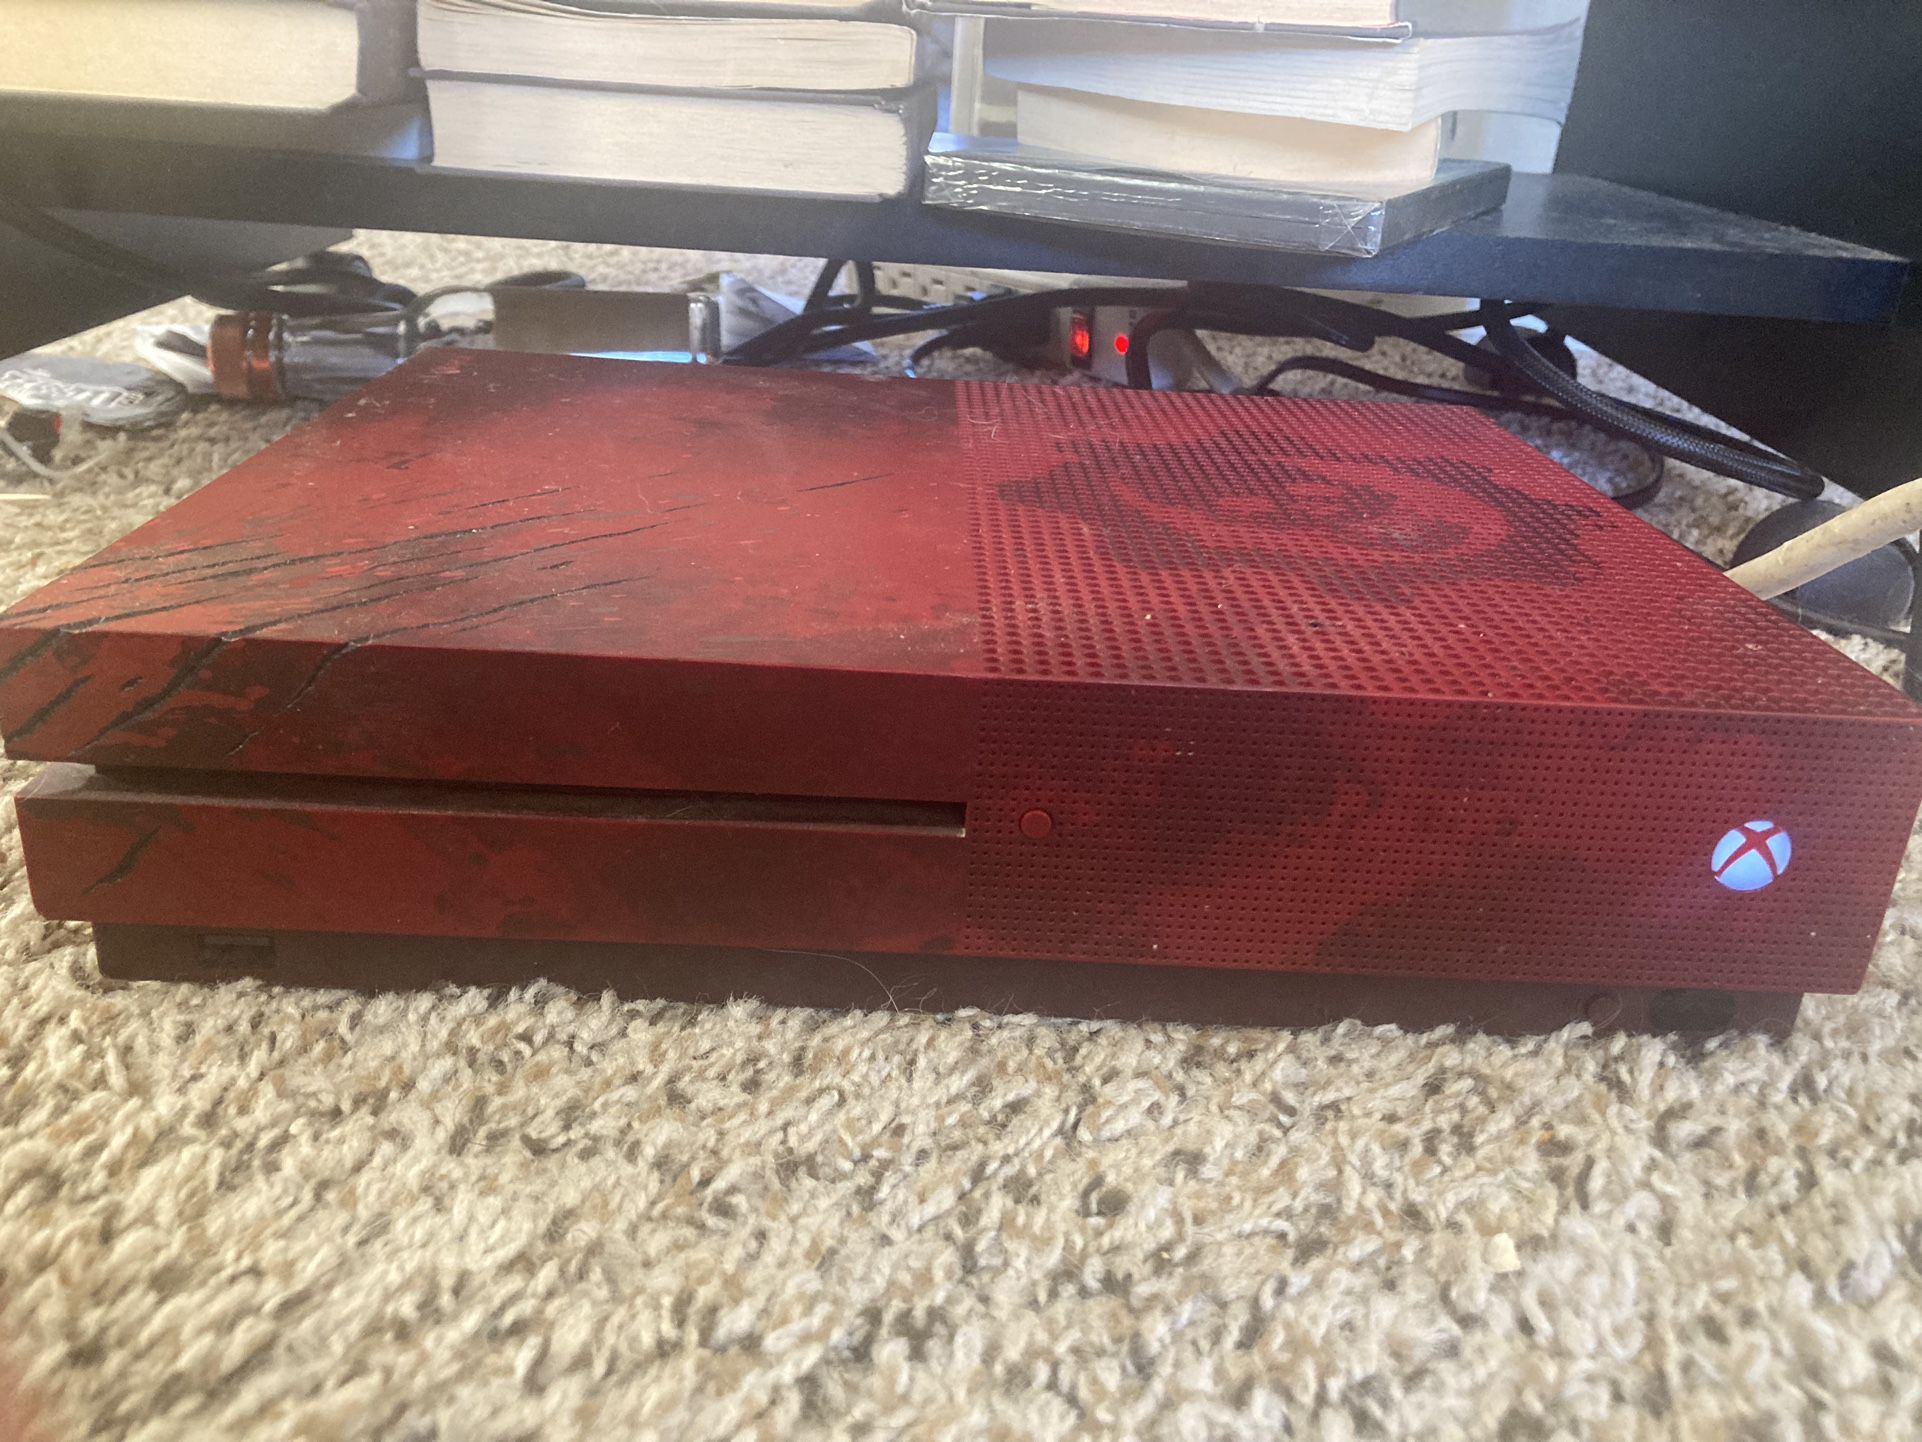 XBOX ONE Gears of War 4 Limited Edition 2TB console